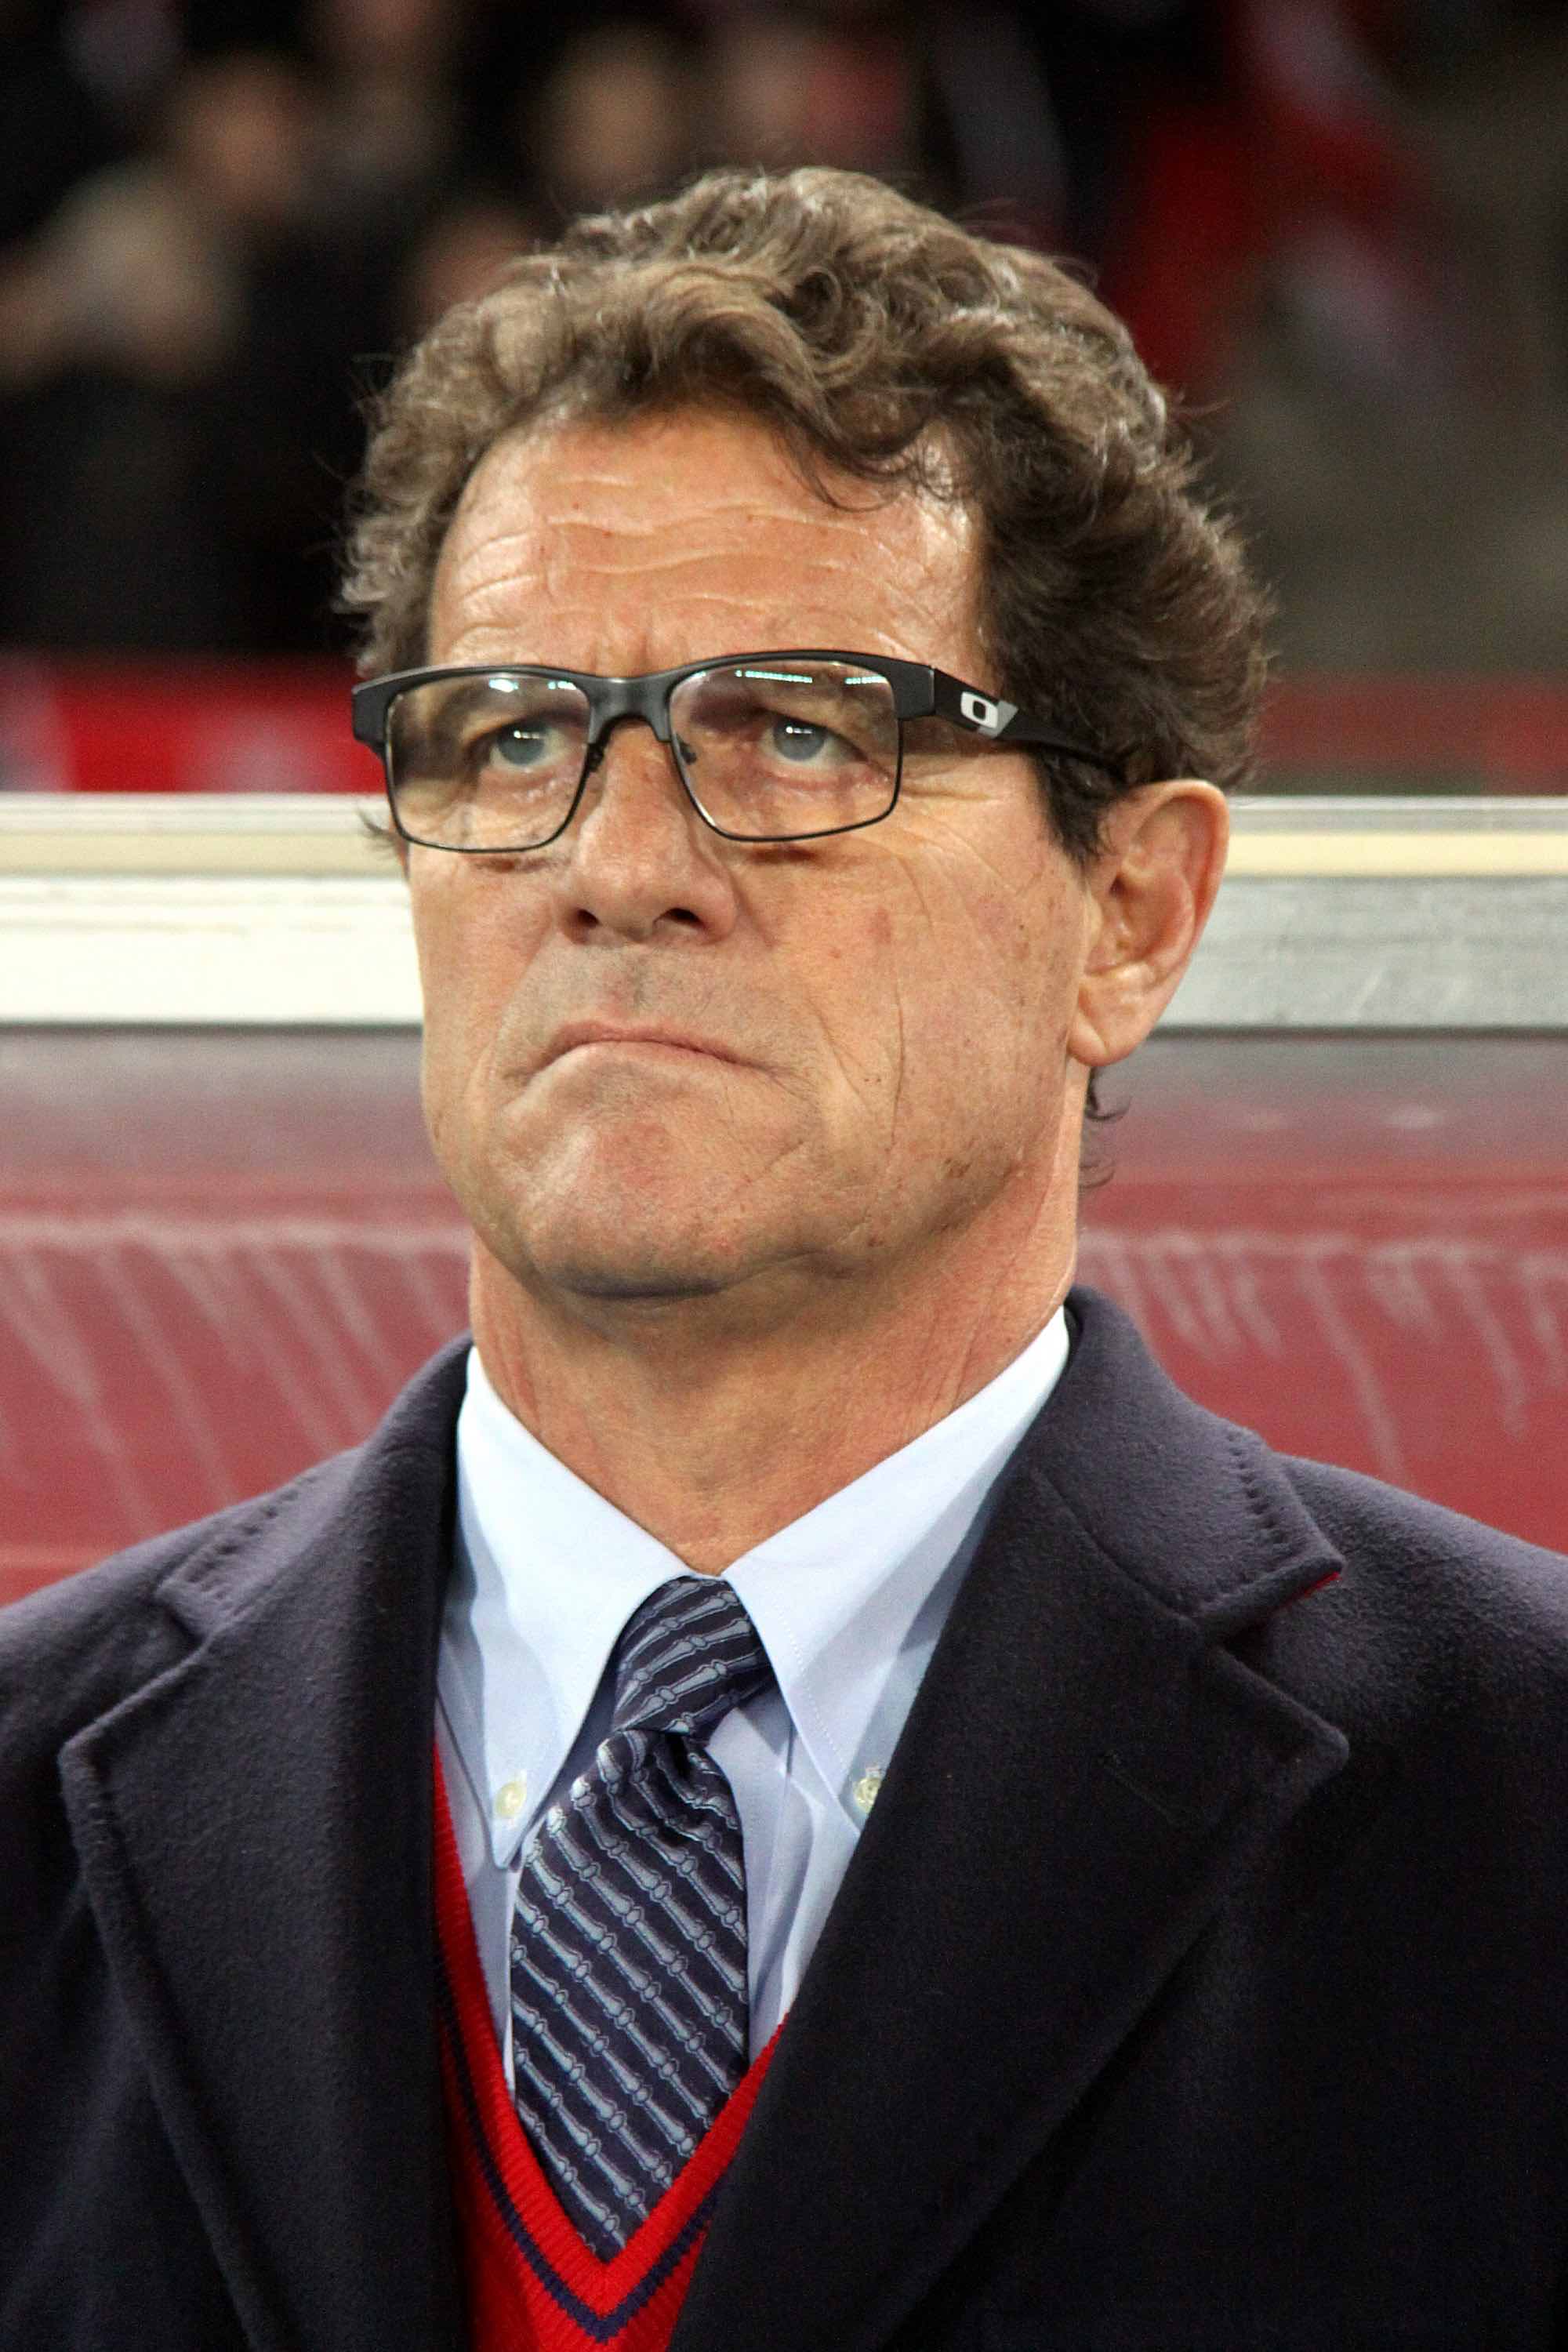 Capello: lawyer says all cash from charity friendlies "declared" to taxman (Credit: Steindy)